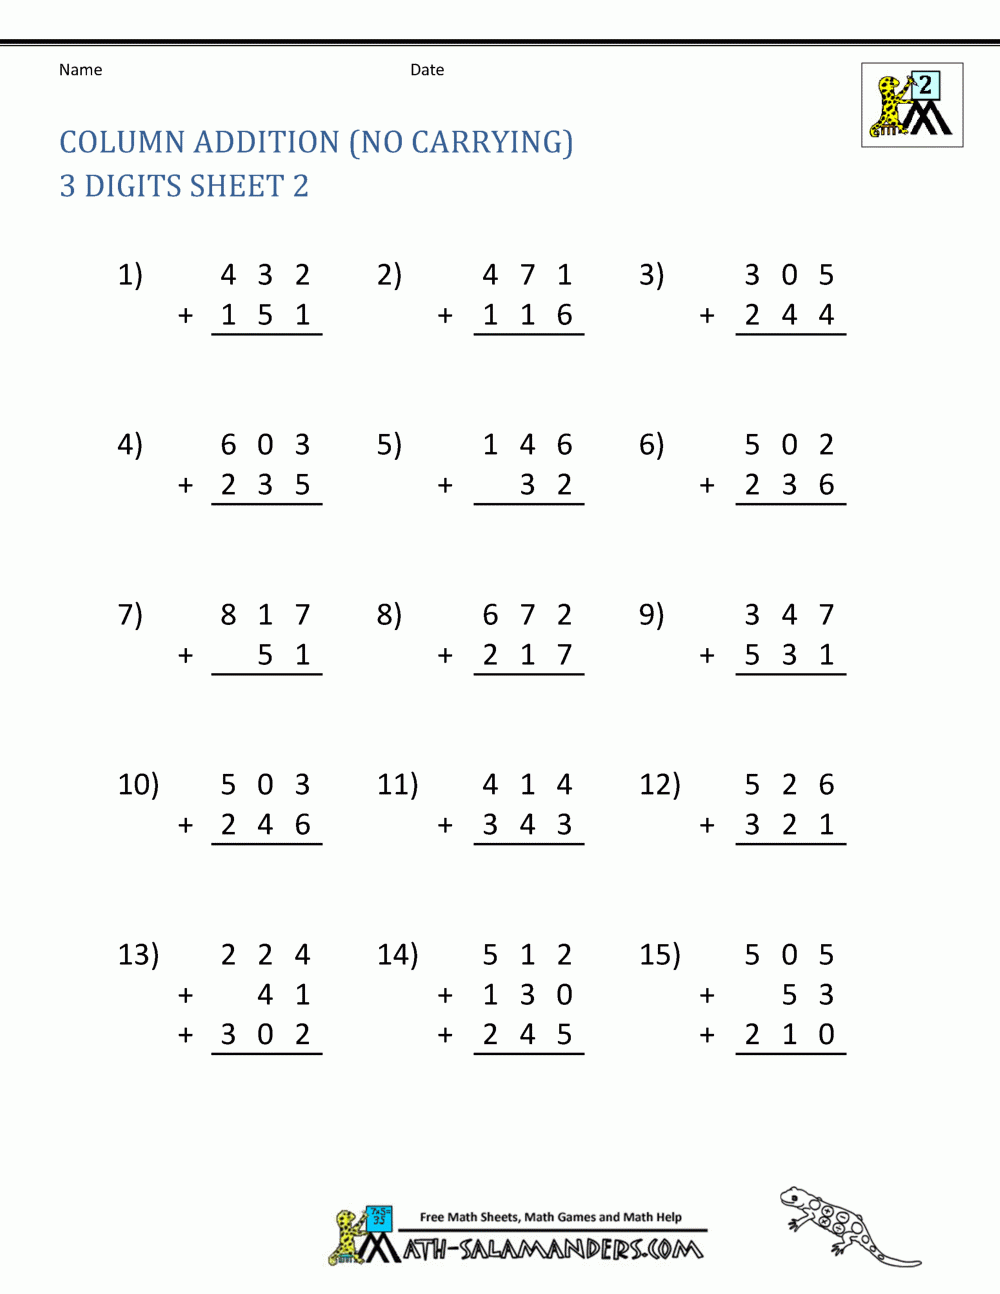 5 Free Math Worksheets Second Grade 2 Word Problems Amp 2nd Grade 